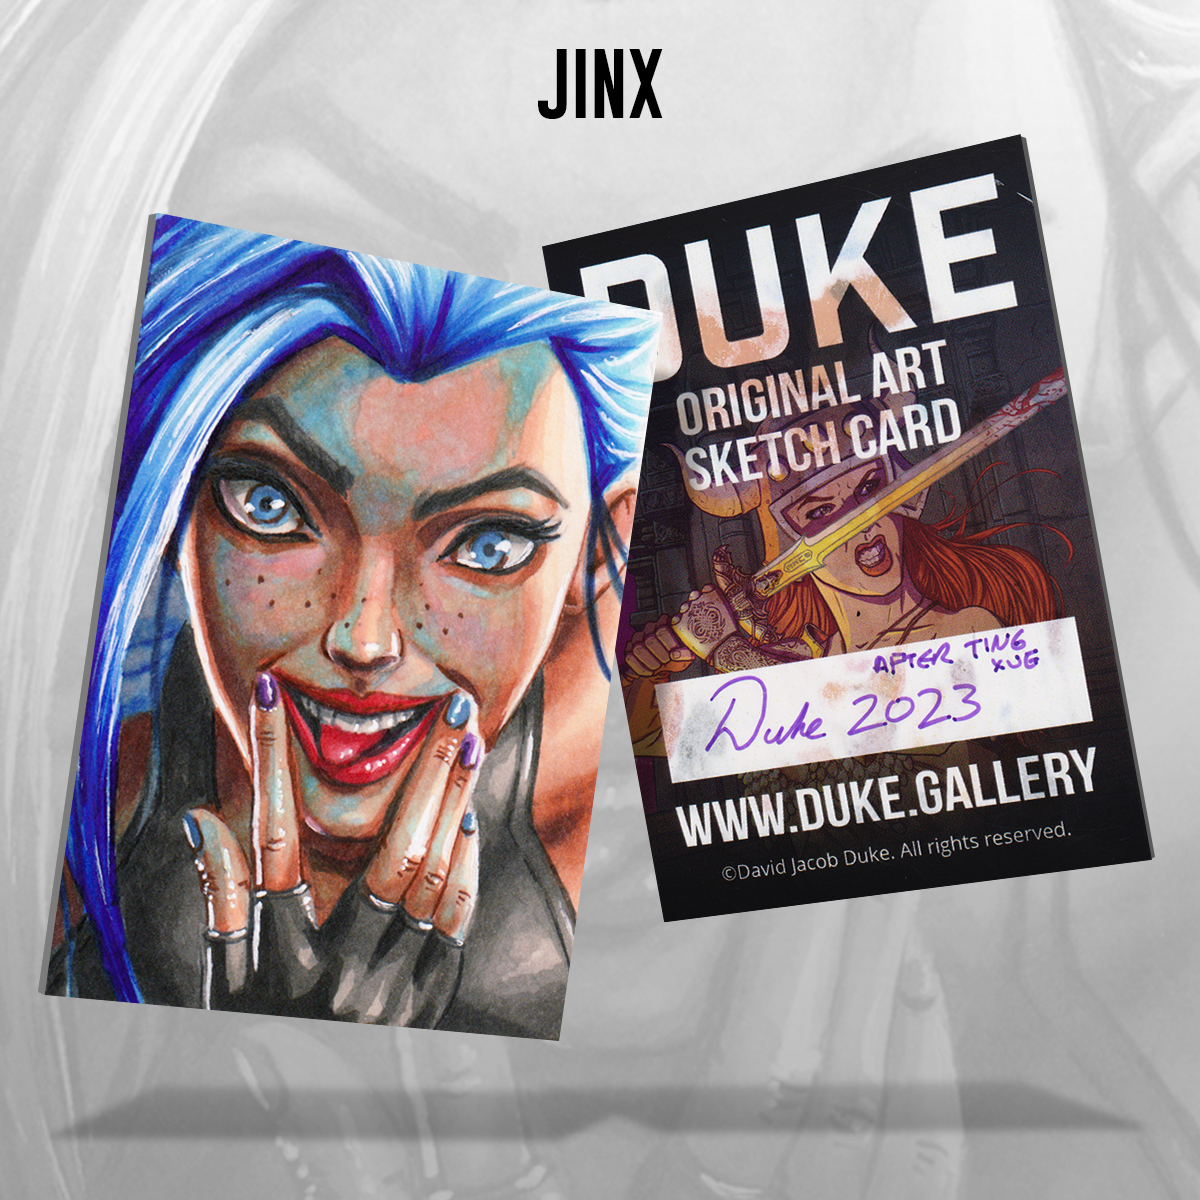 Jinx Sketch Card by Duke. After Ting Xue